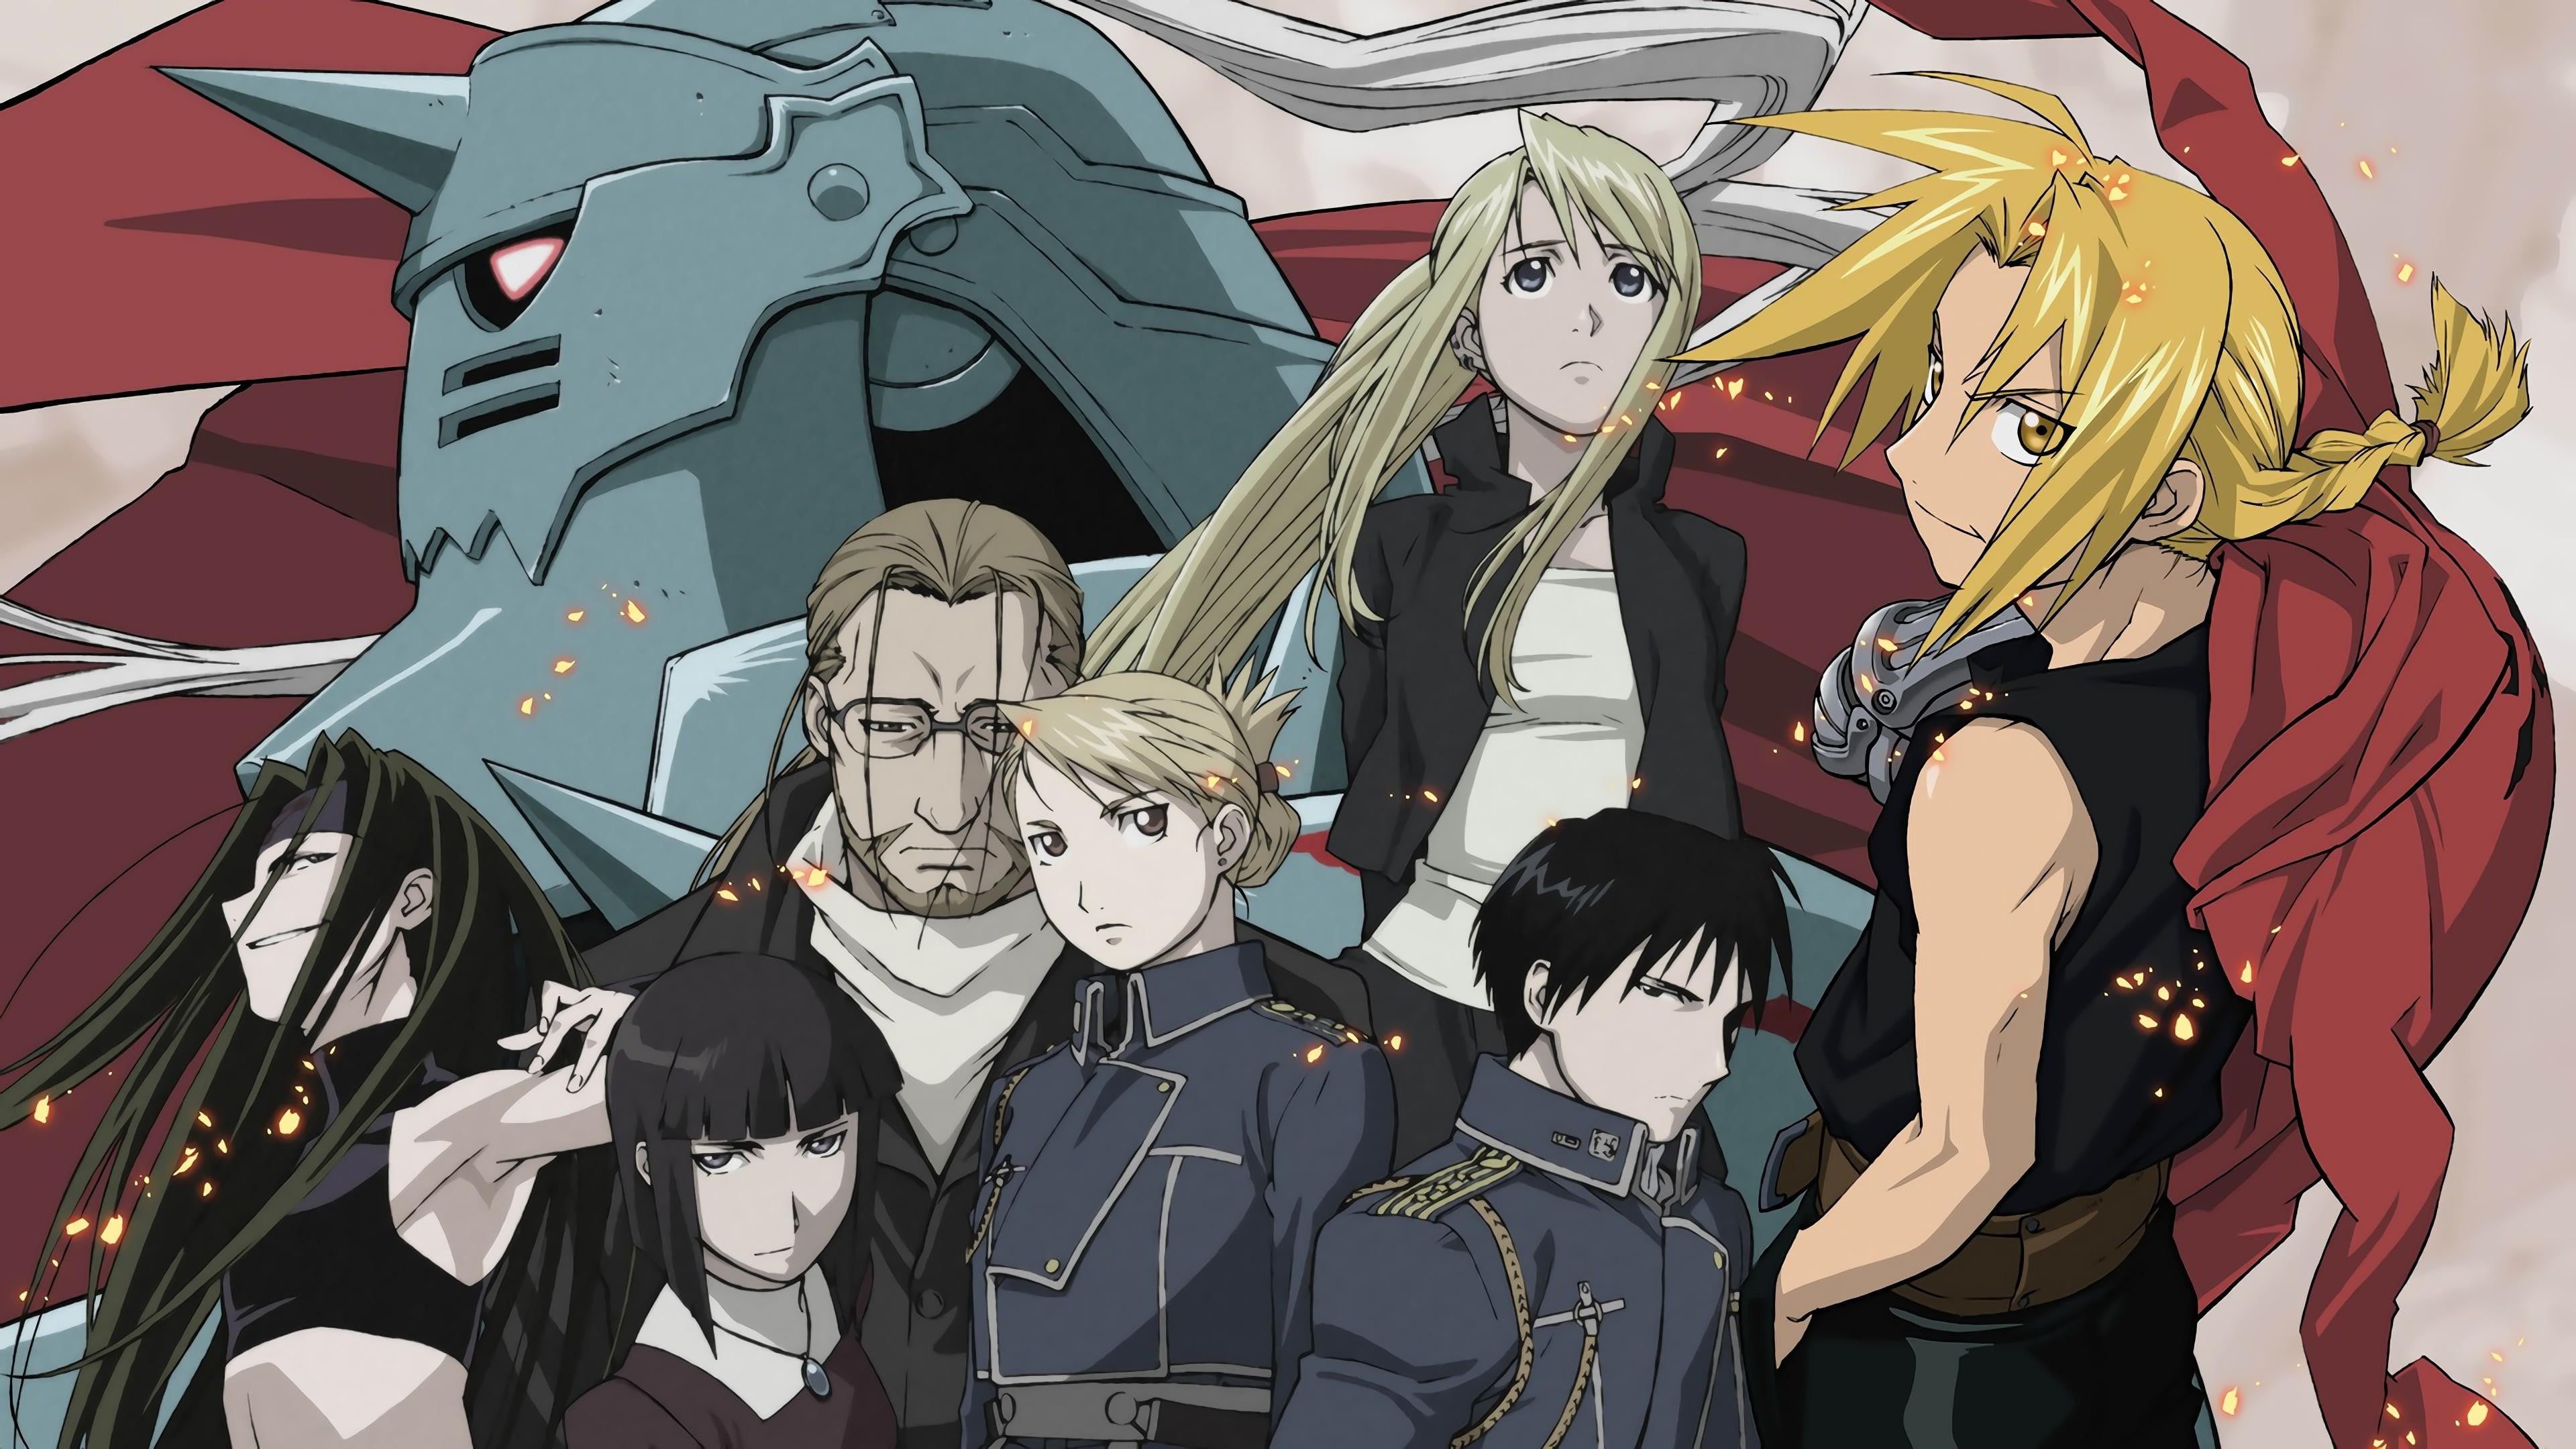 Fullmetal Alchemist: Masterful Story, Complex Characters, Unforgettable Action